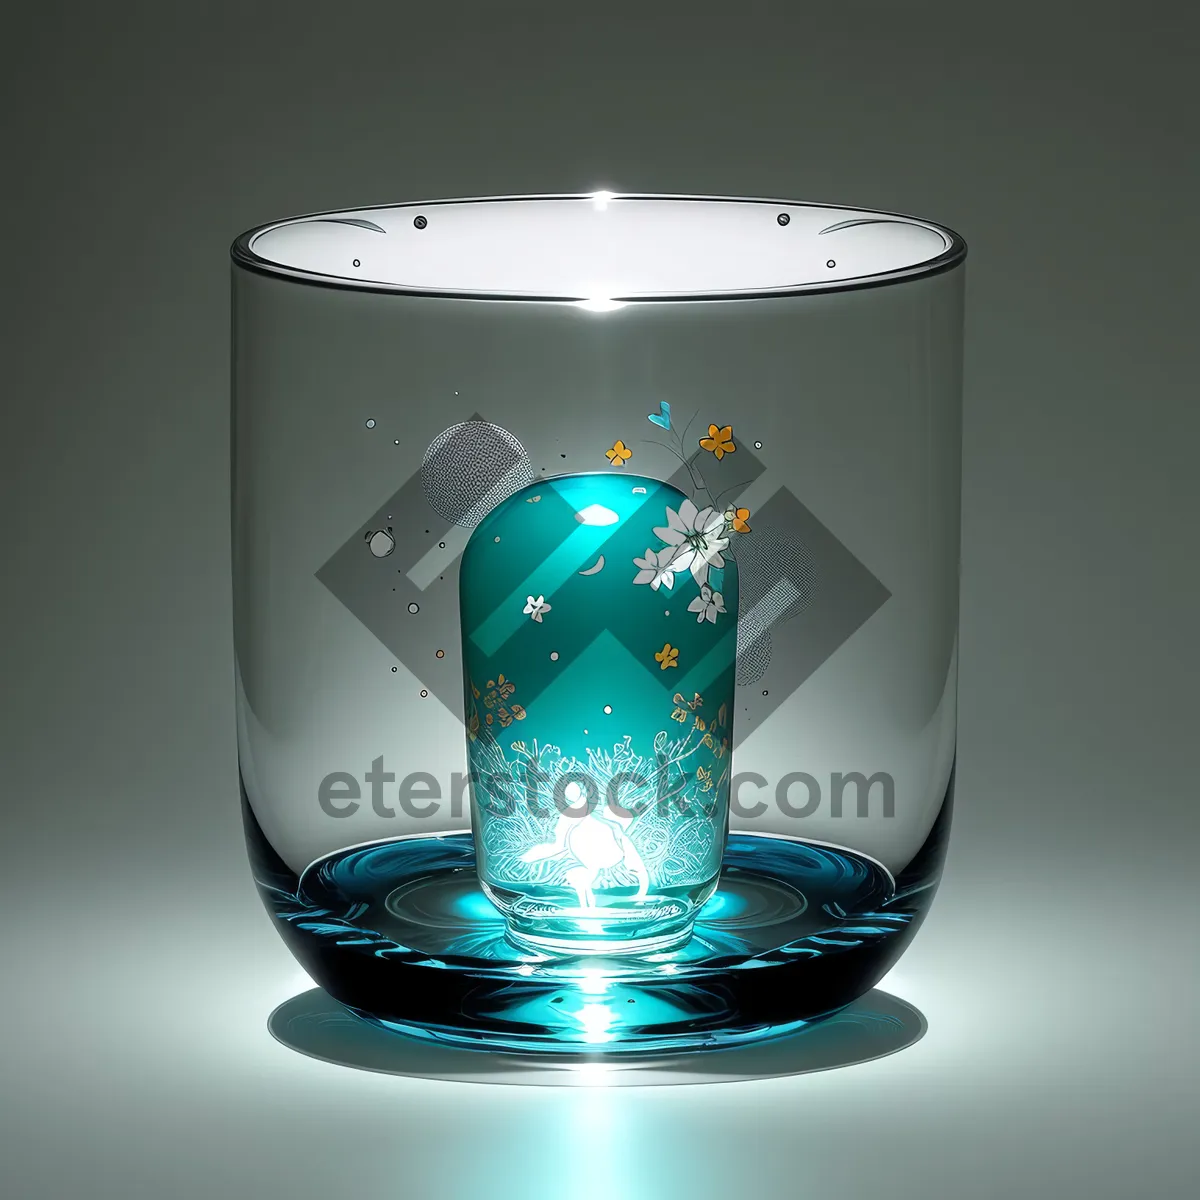 Picture of Refreshing Party Pitcher with Ice-cold Drinks